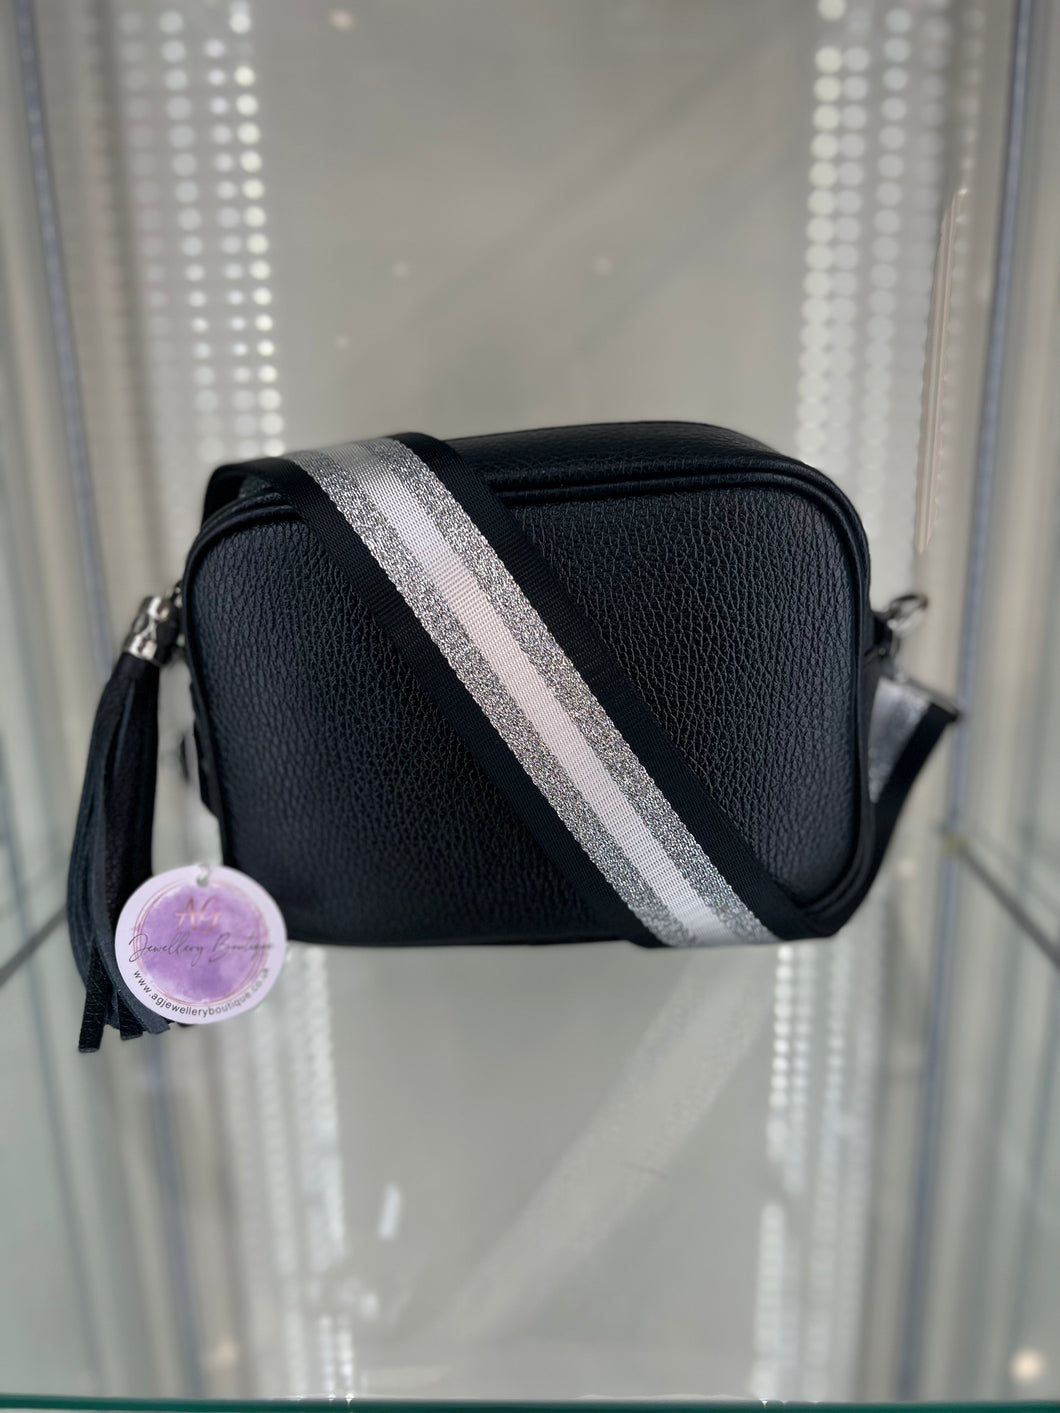 Real leather Black crossbody bag with Black/Silver/White Striped strap